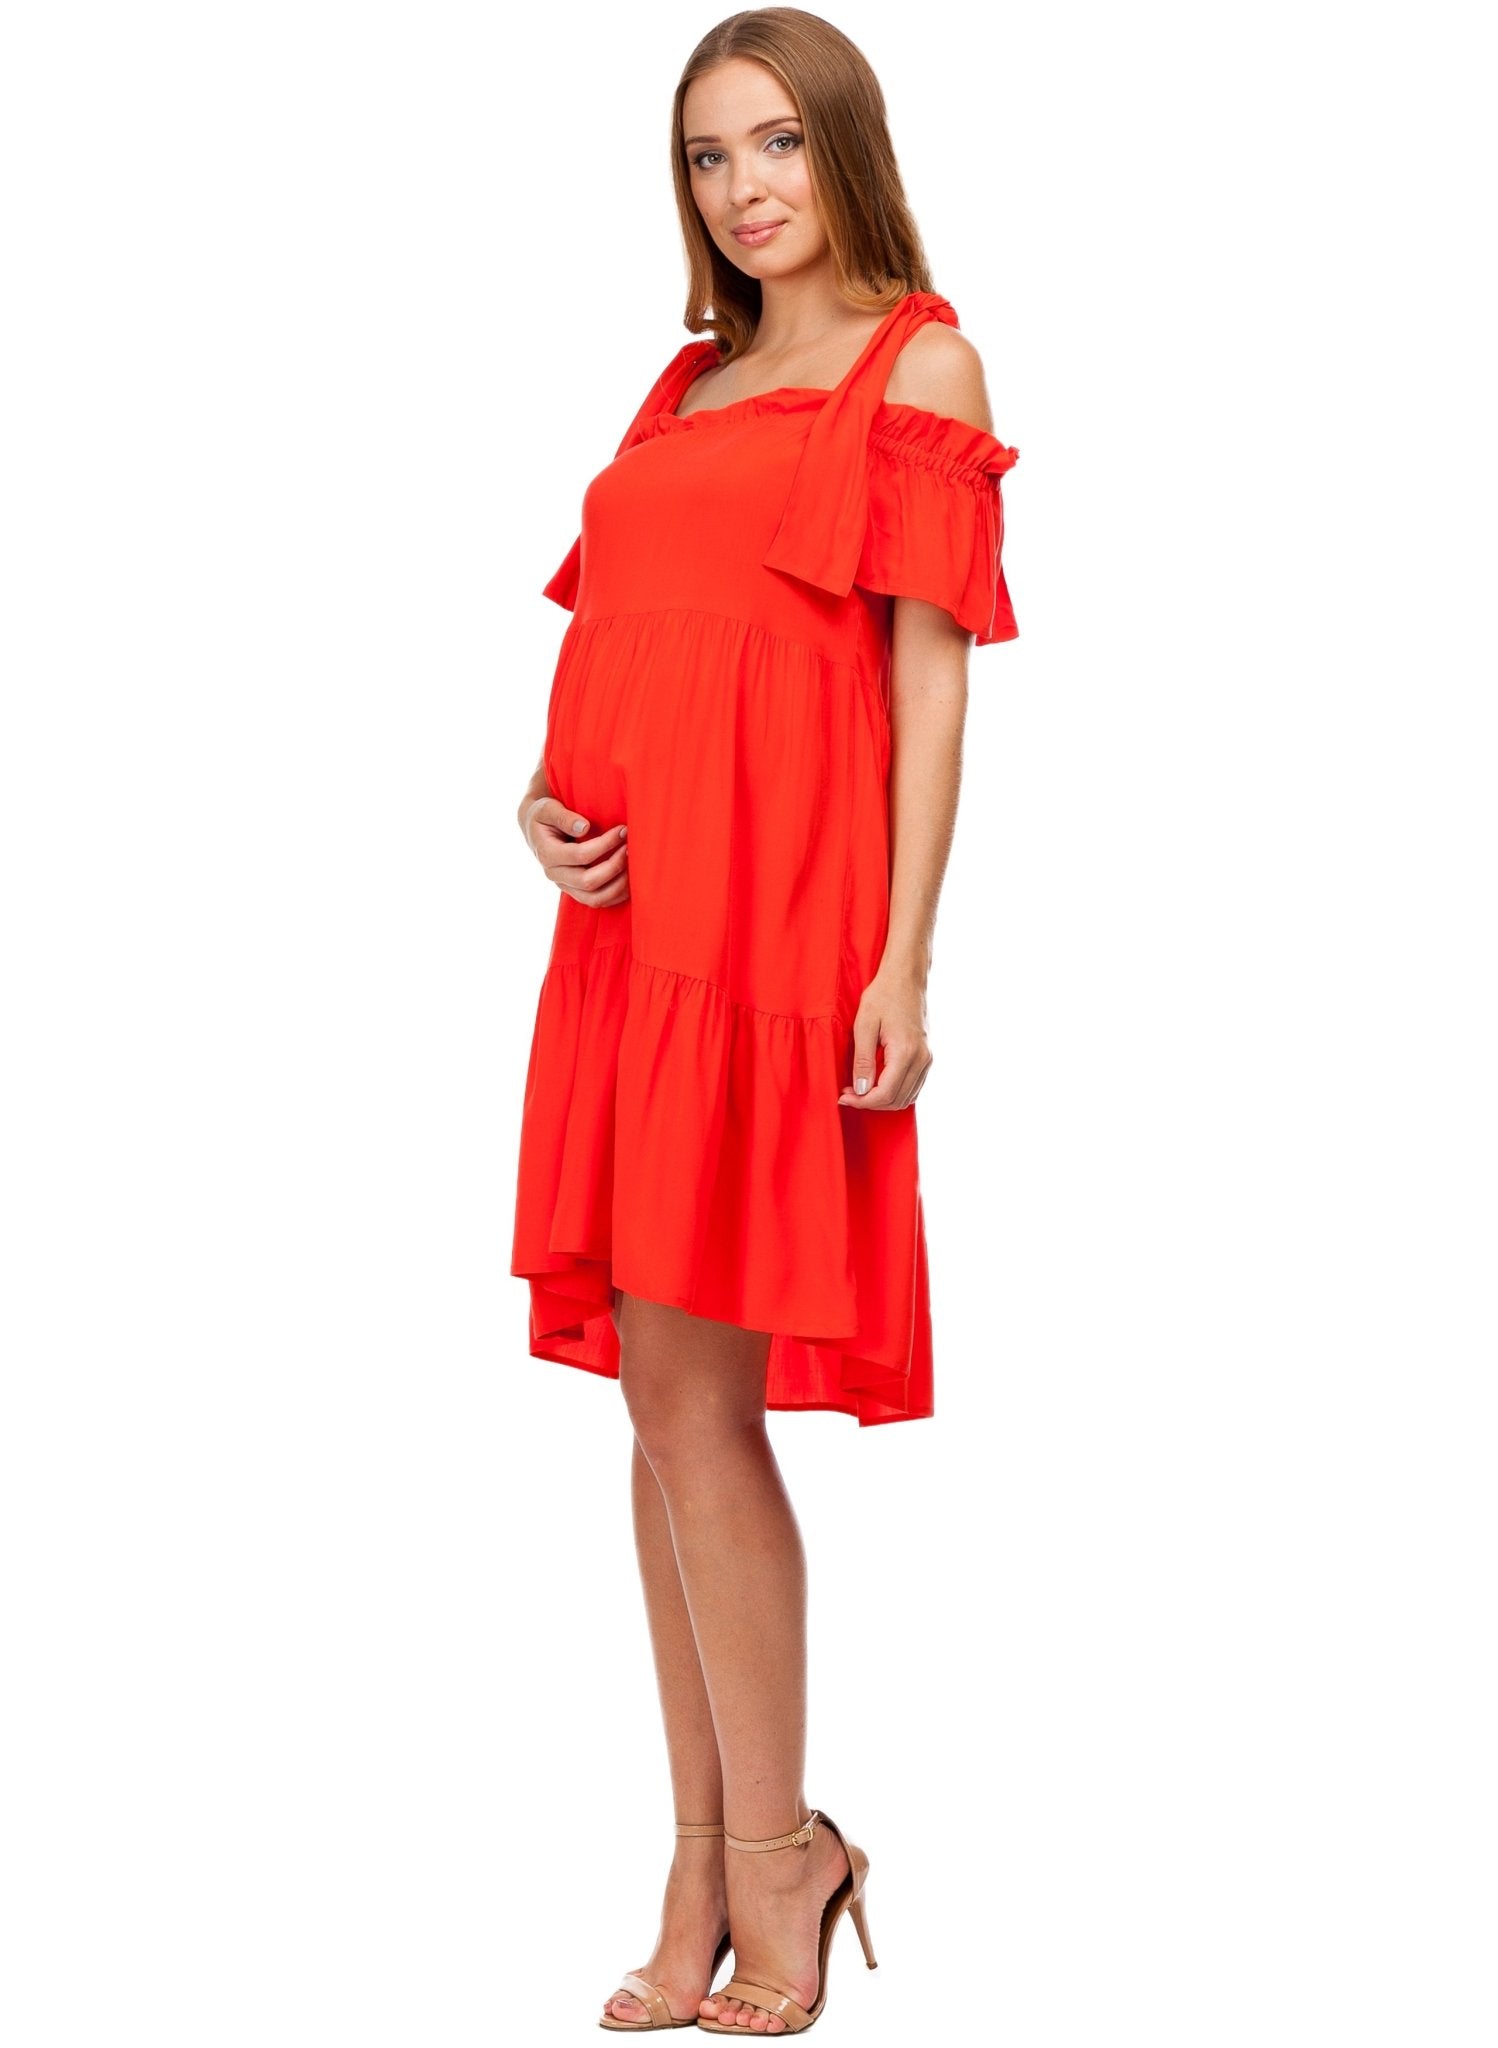 Positano Maternity Dress - Red - Mums and Bumps